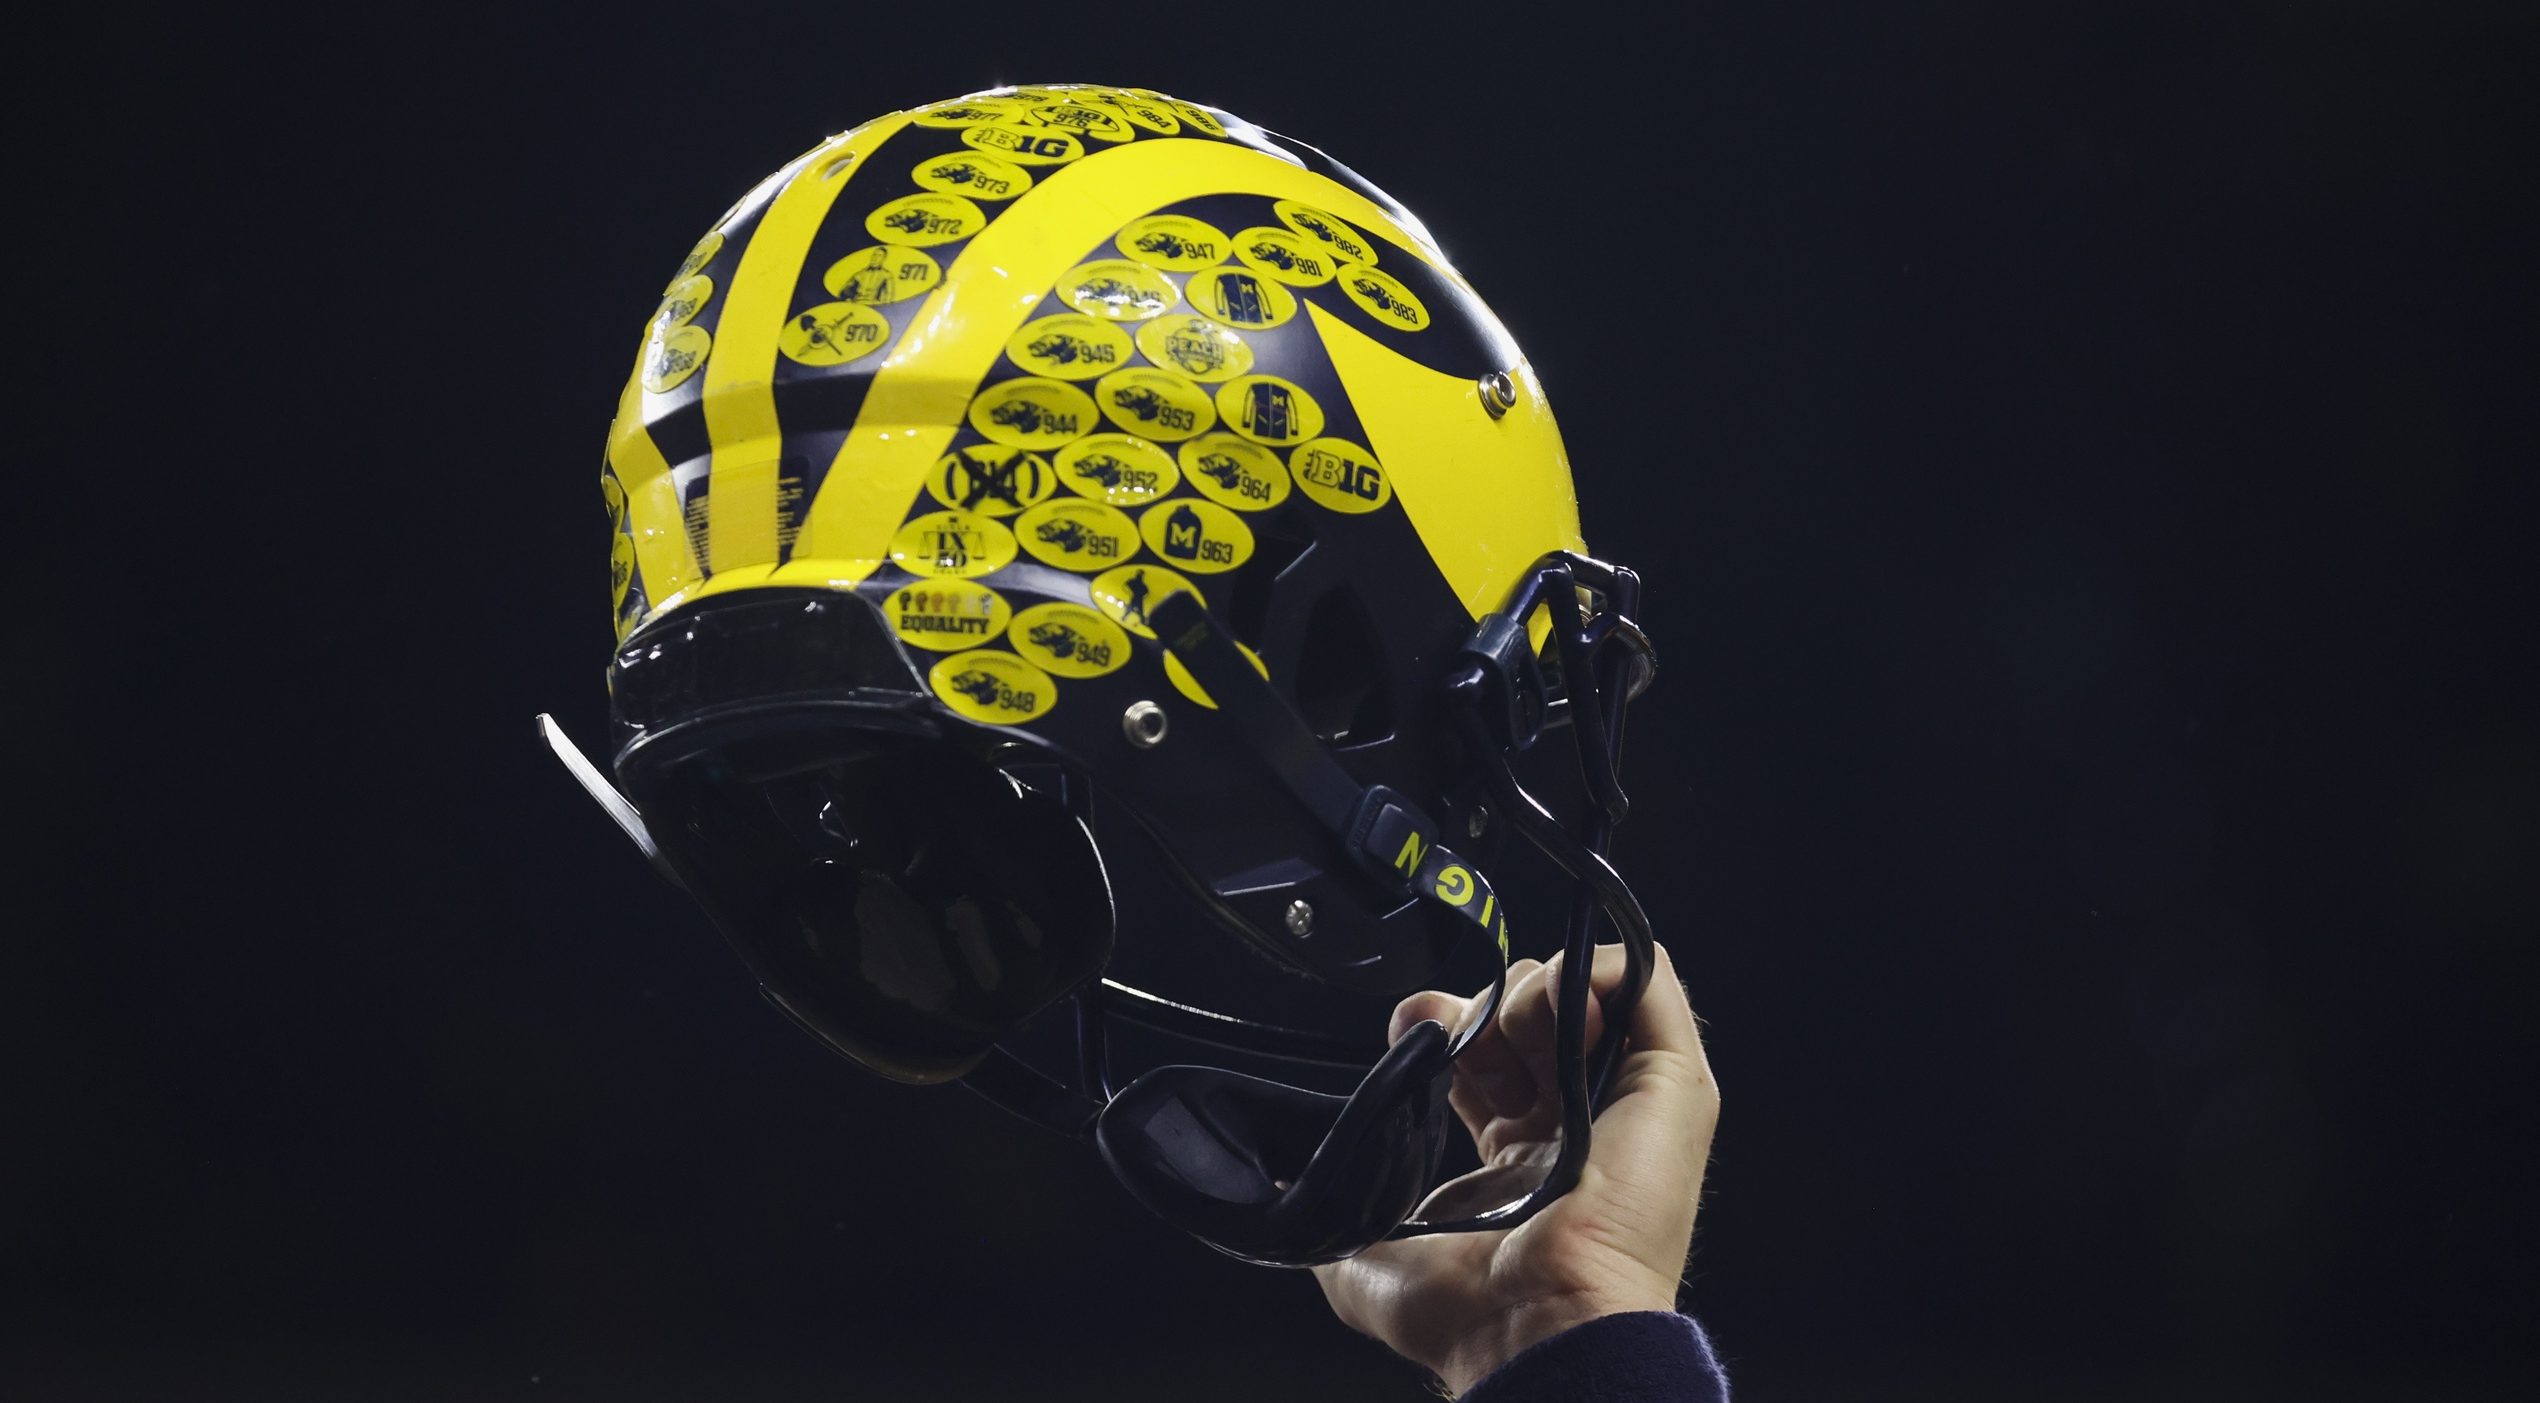 michigan receives punishment from ncaa